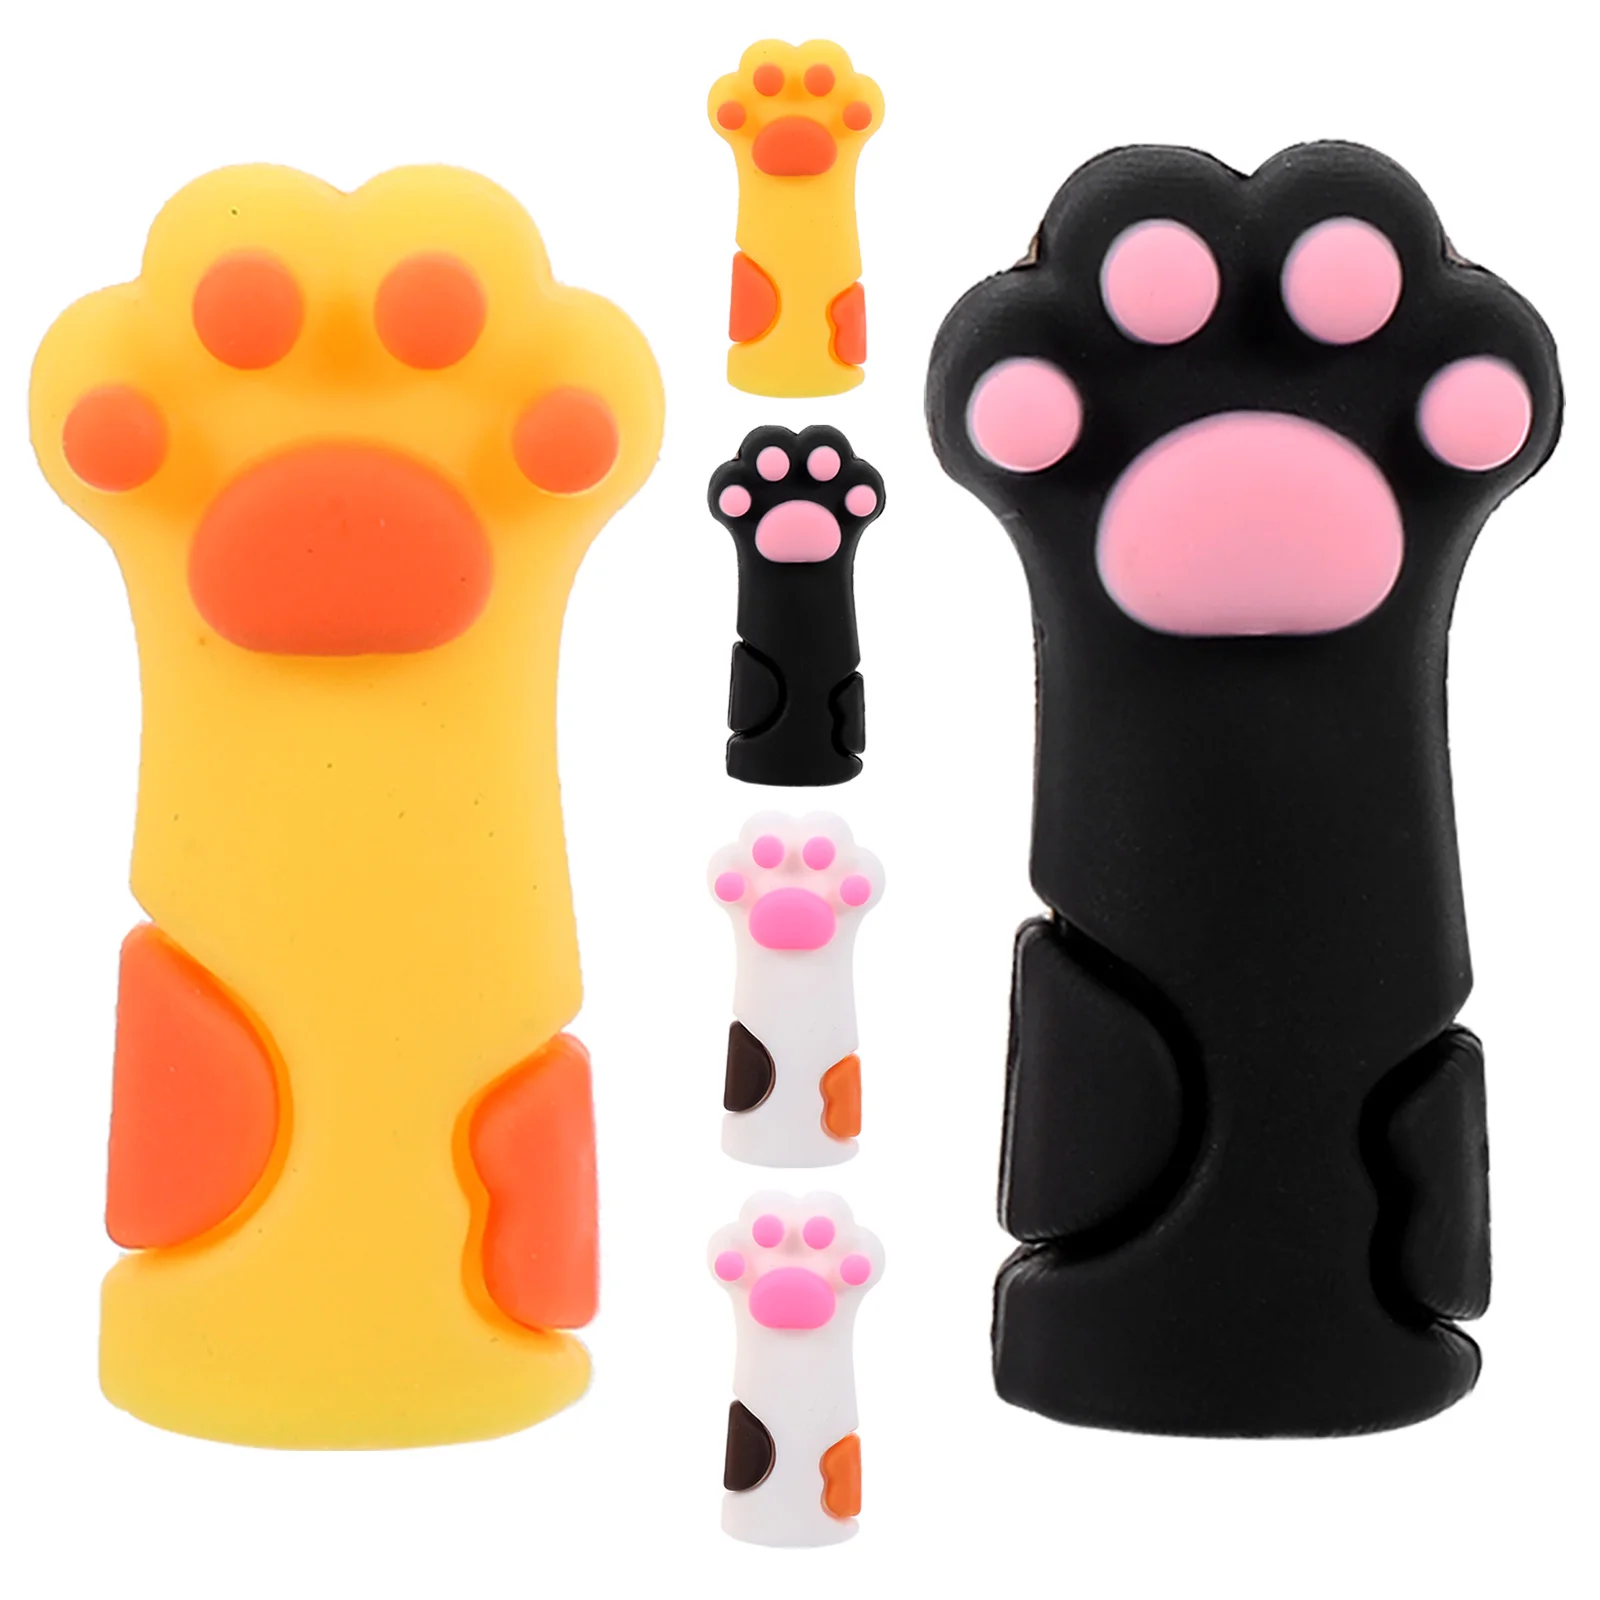 

6 Pcs Pen Case Adorable Protectors Cat Paw Claw Extenders Silica Gel Silicone